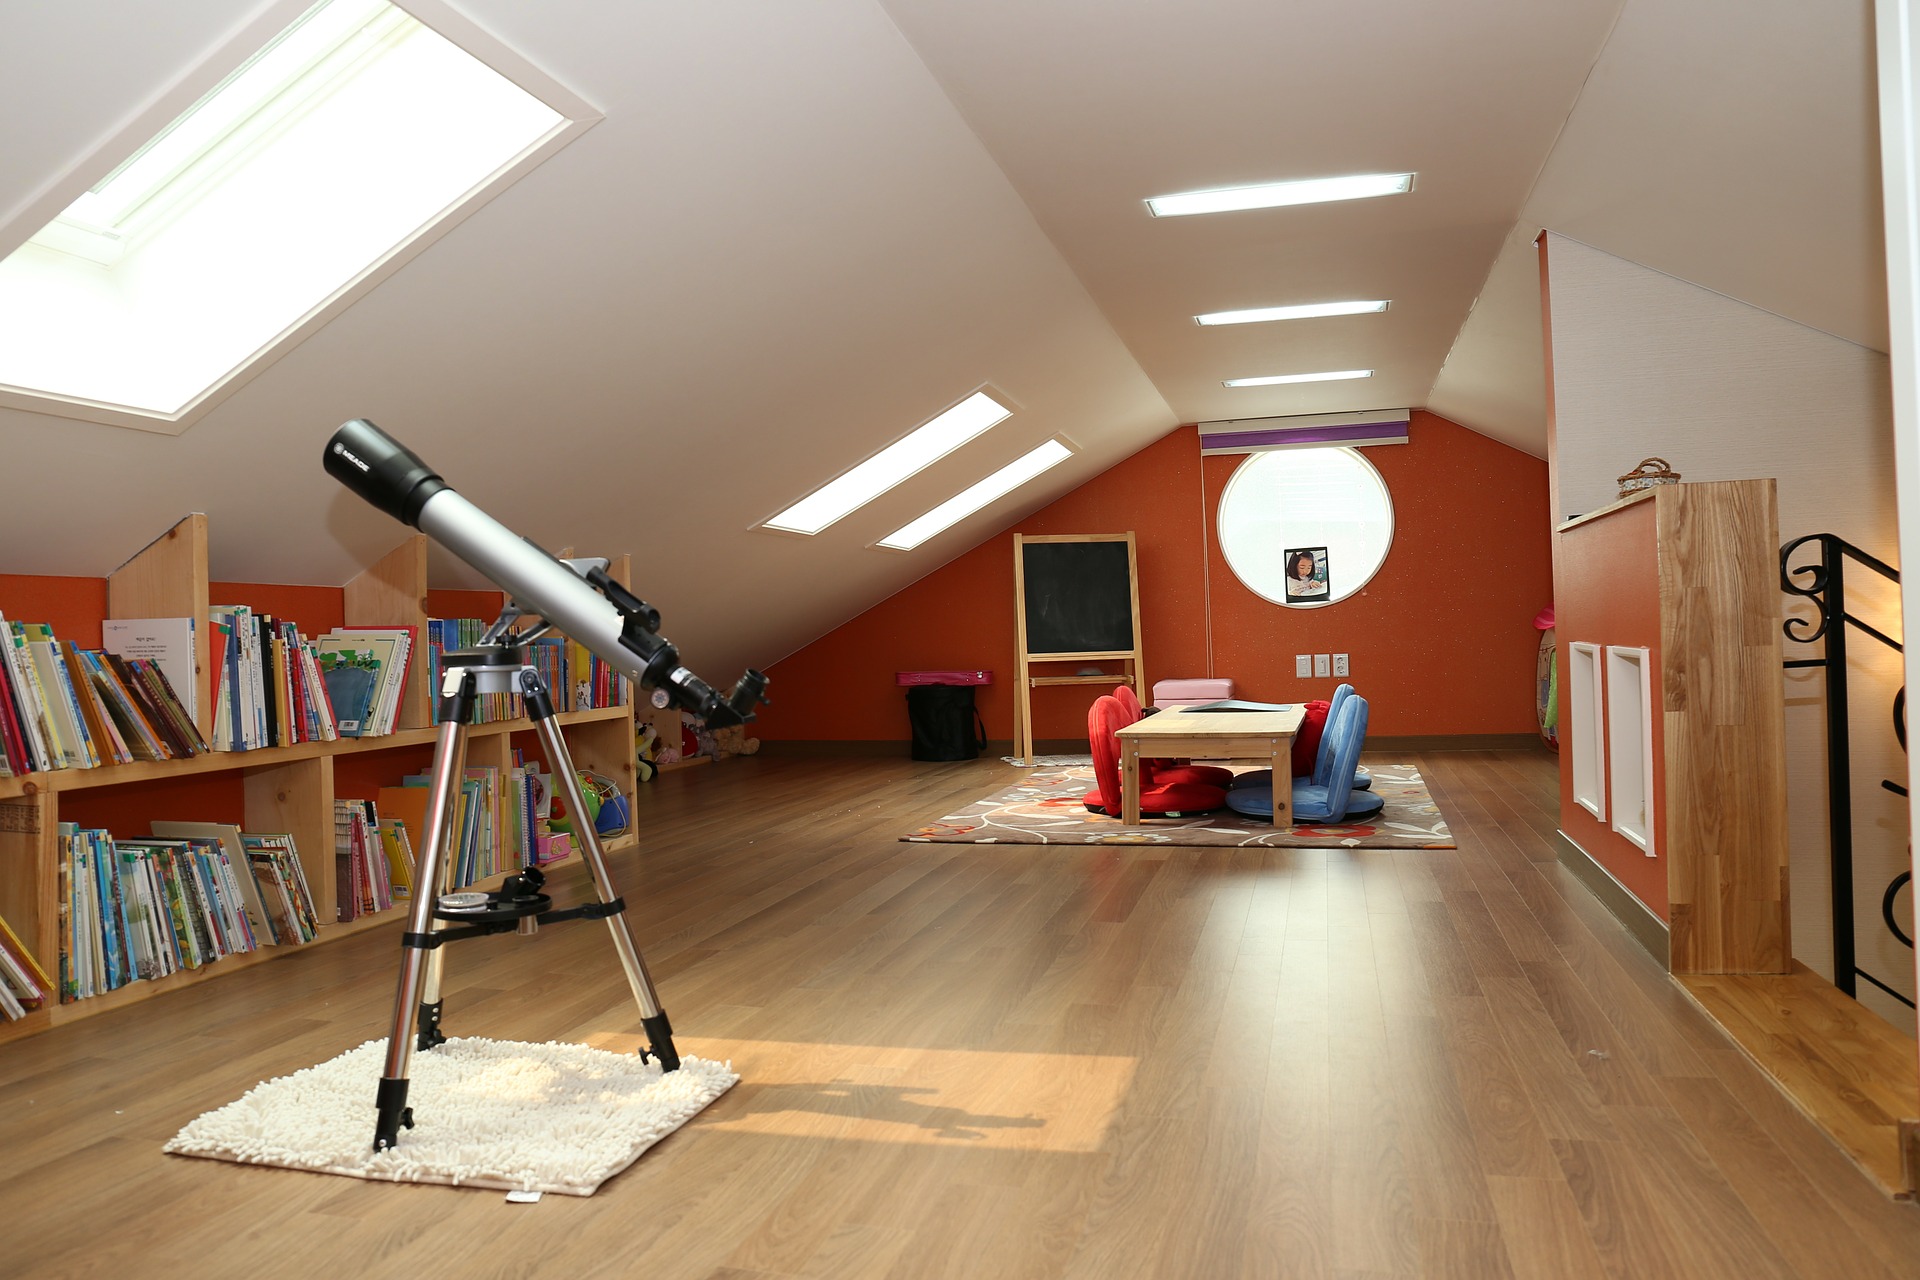 Loft Conversions - South-West London | A Guide to Converting an Attic